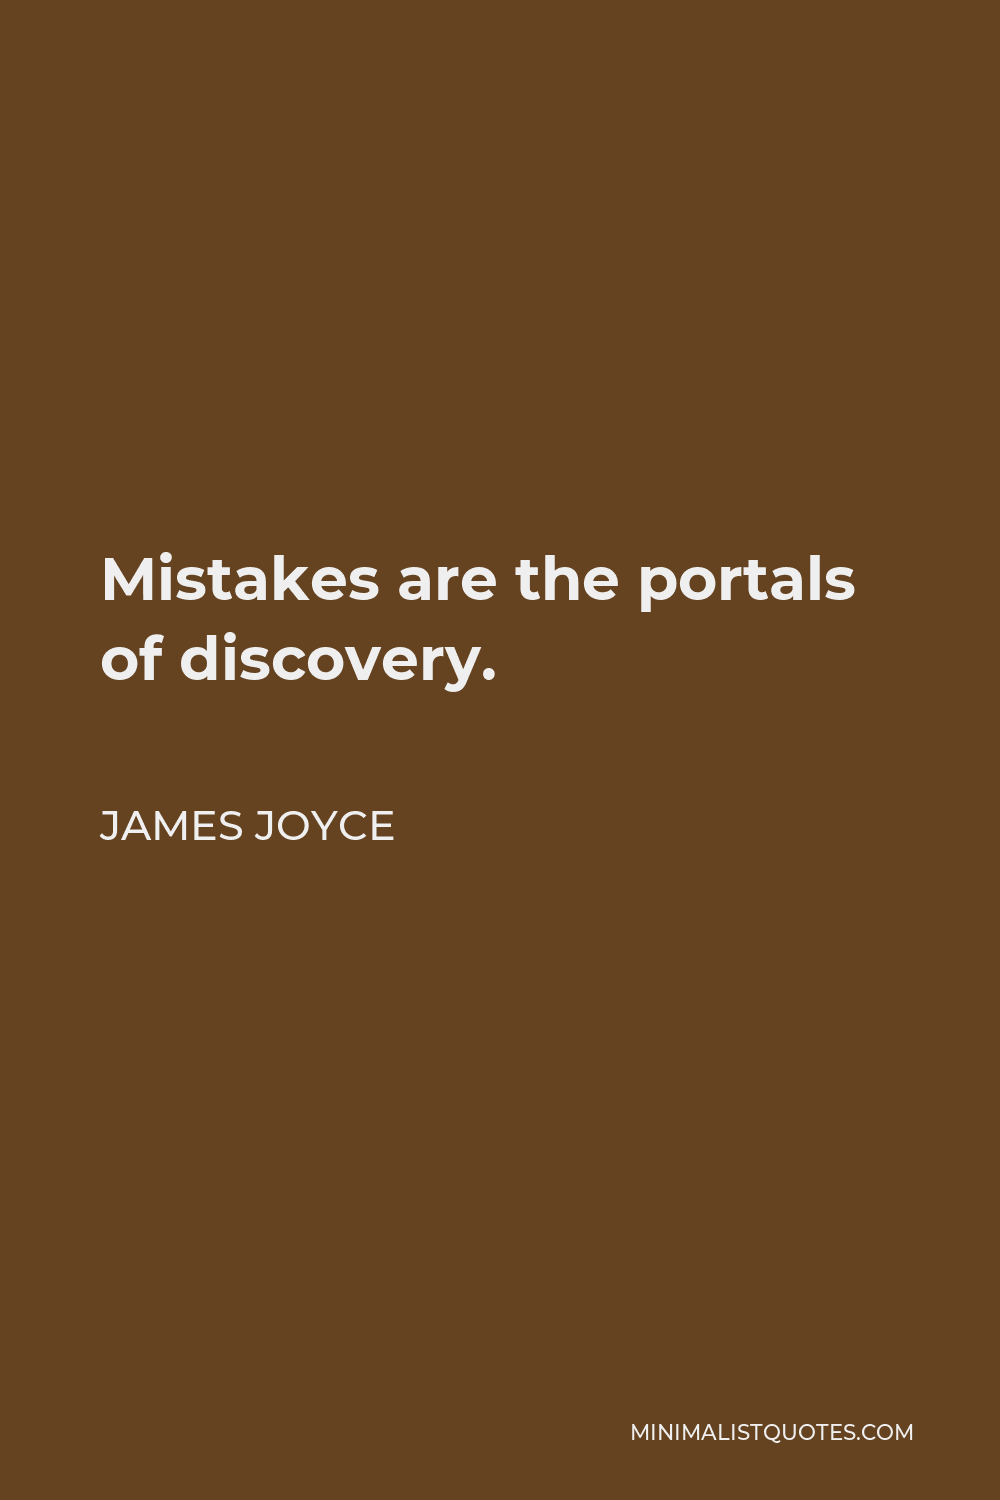 James Joyce Quote - Mistakes are the portals of discovery.